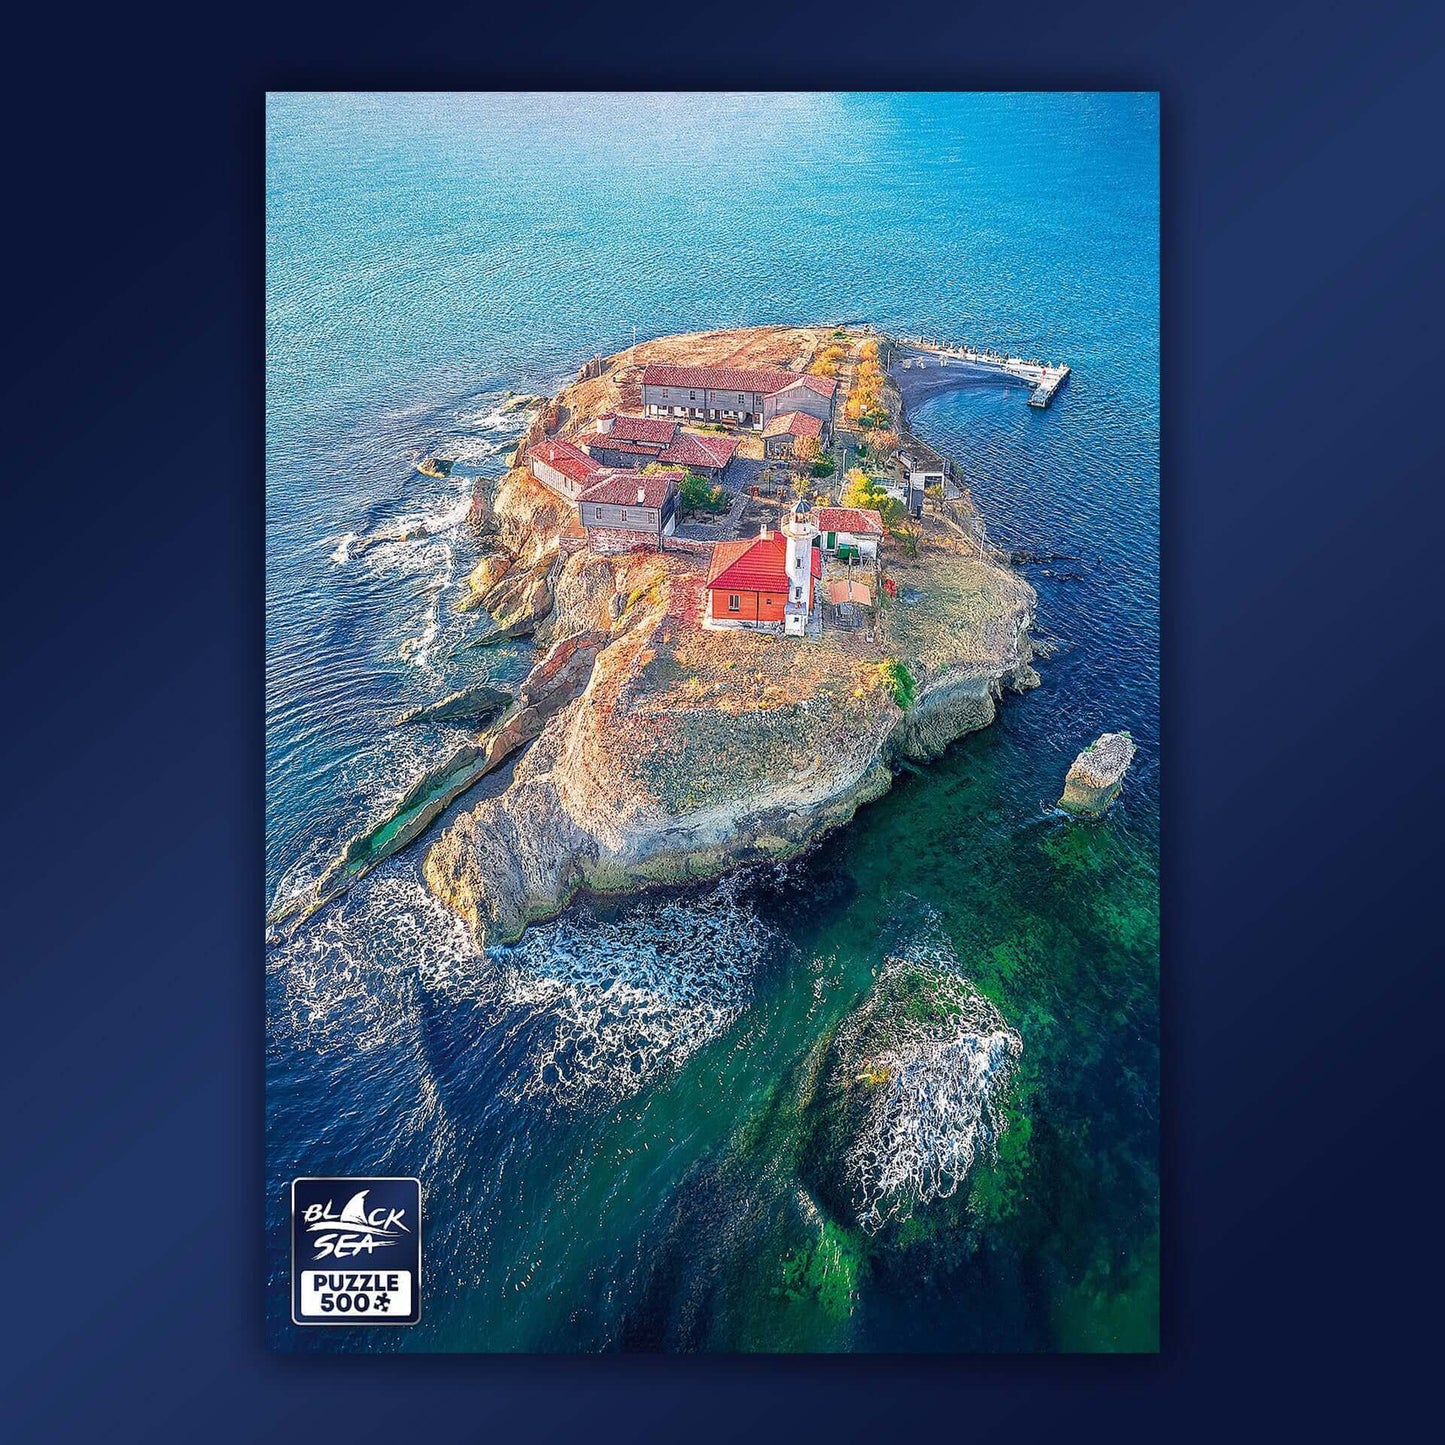 Puzzle Black Sea 500 pieces - St. Anastasia Island, Vladislav Terziyski is not only a photographer, he is an adventurer and a true lover of the mountain. For more than 10 years he takes up the challenge to conquer the most inaccessible places and battle t